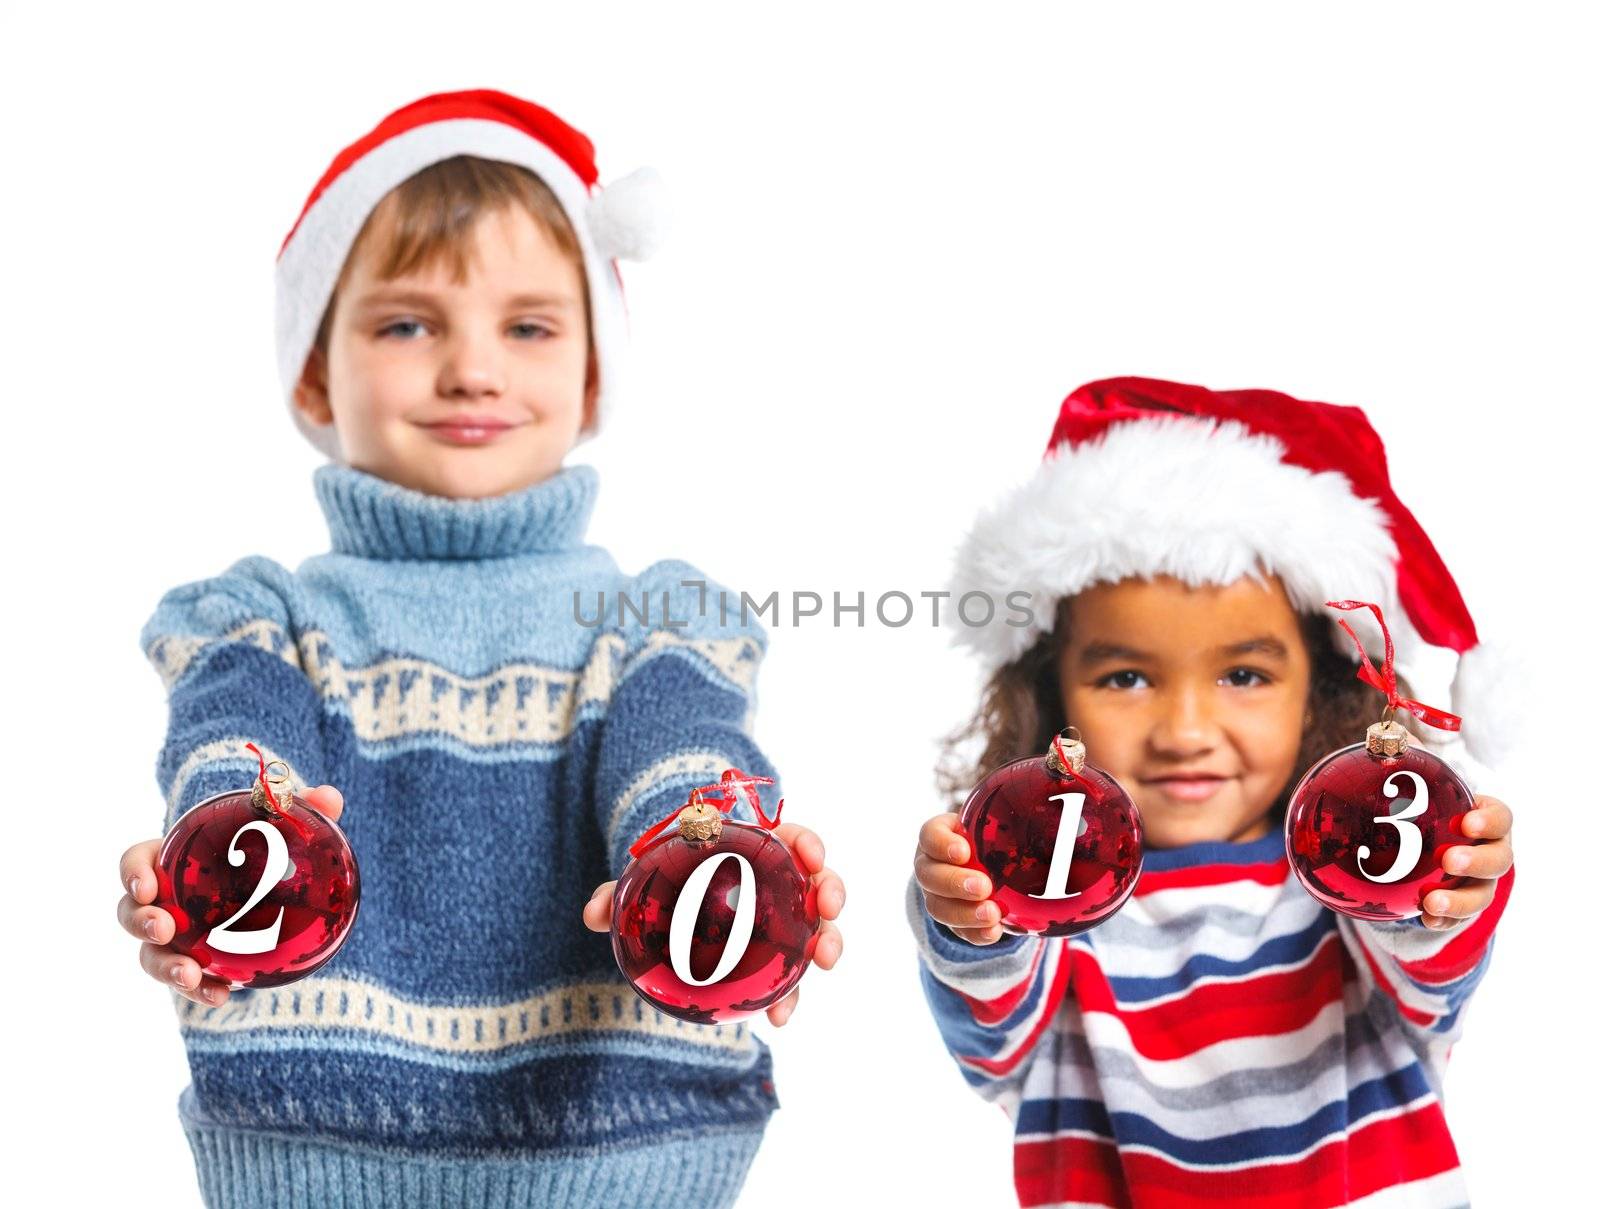 Kids in Santa's hat holding a christmas ball with 2013 against a white background. Focus on the ball